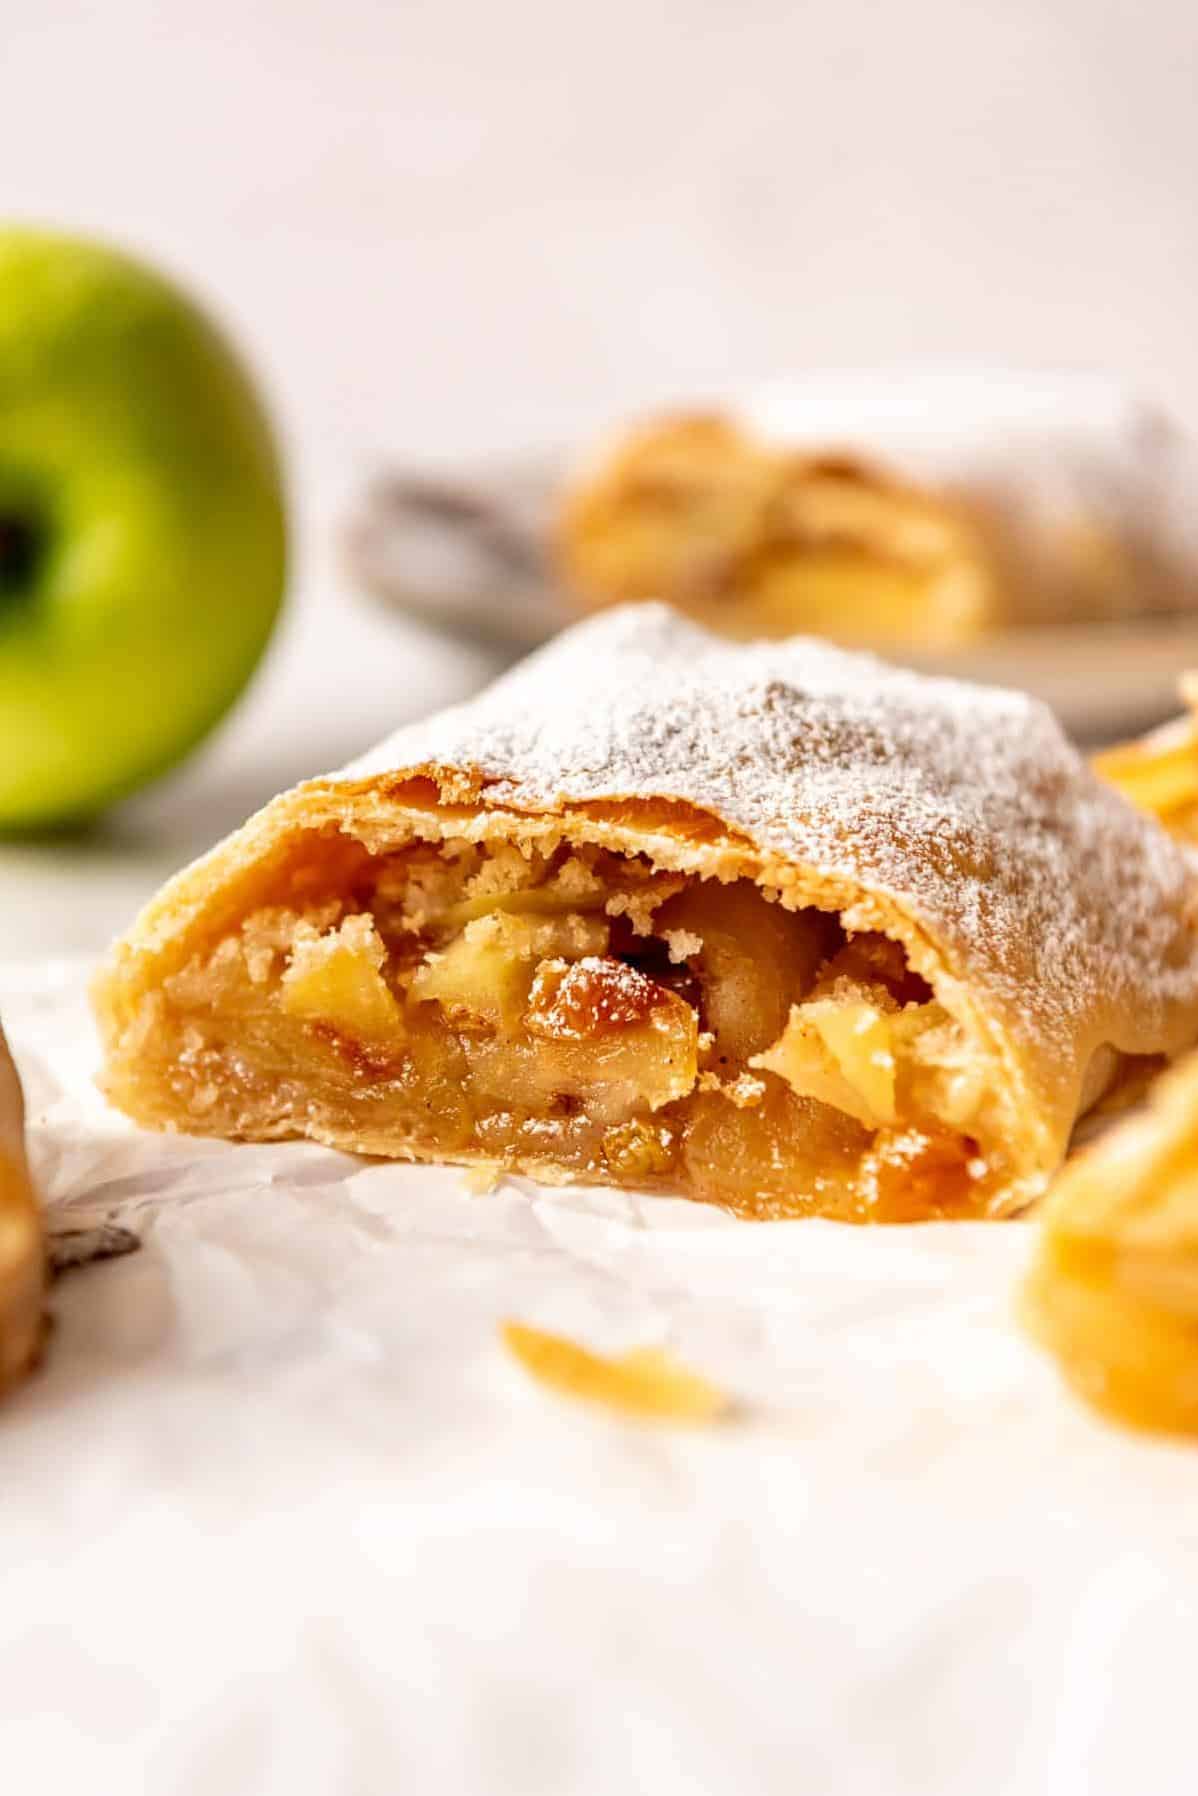  Perfectly flaky pastry with a warm, gooey filling